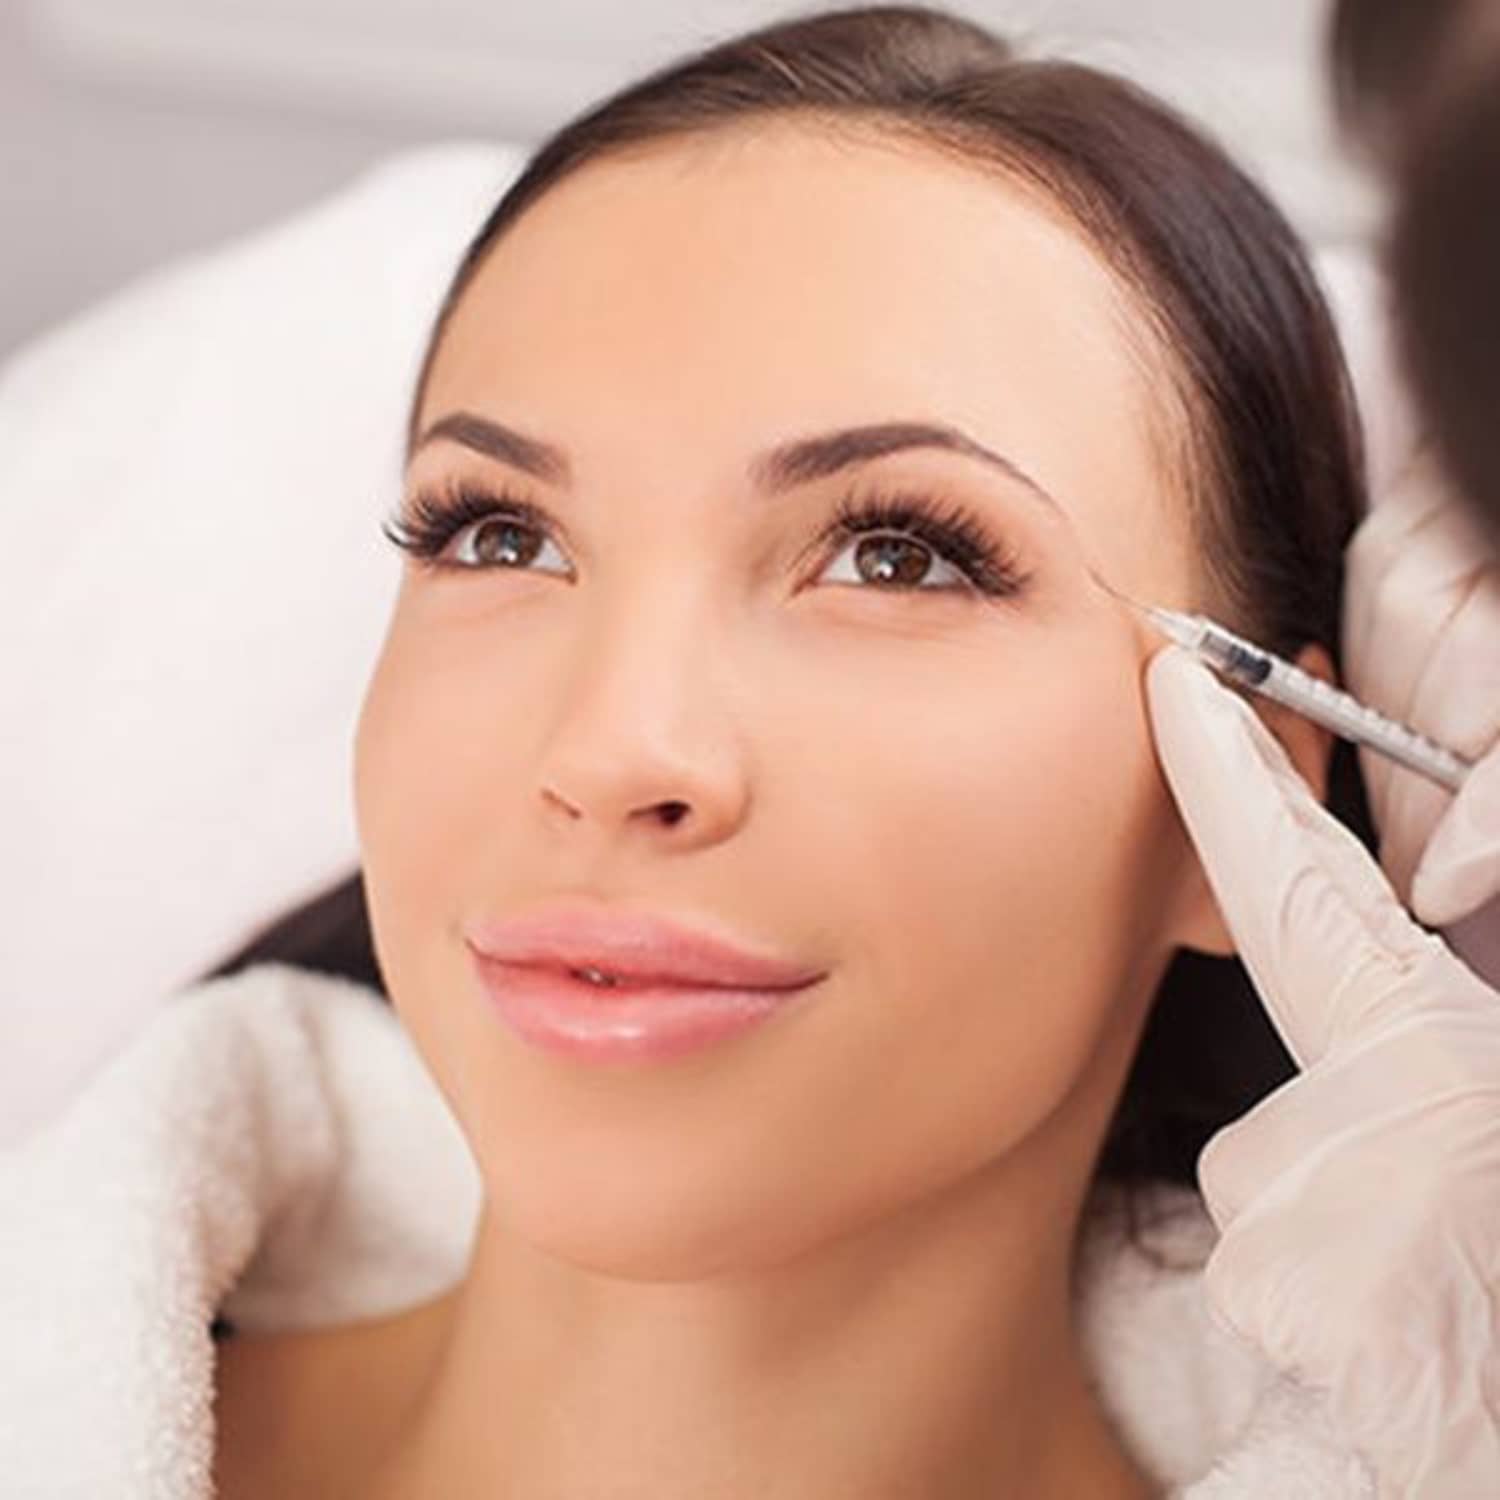 What are the Benefits of Botox Injections?